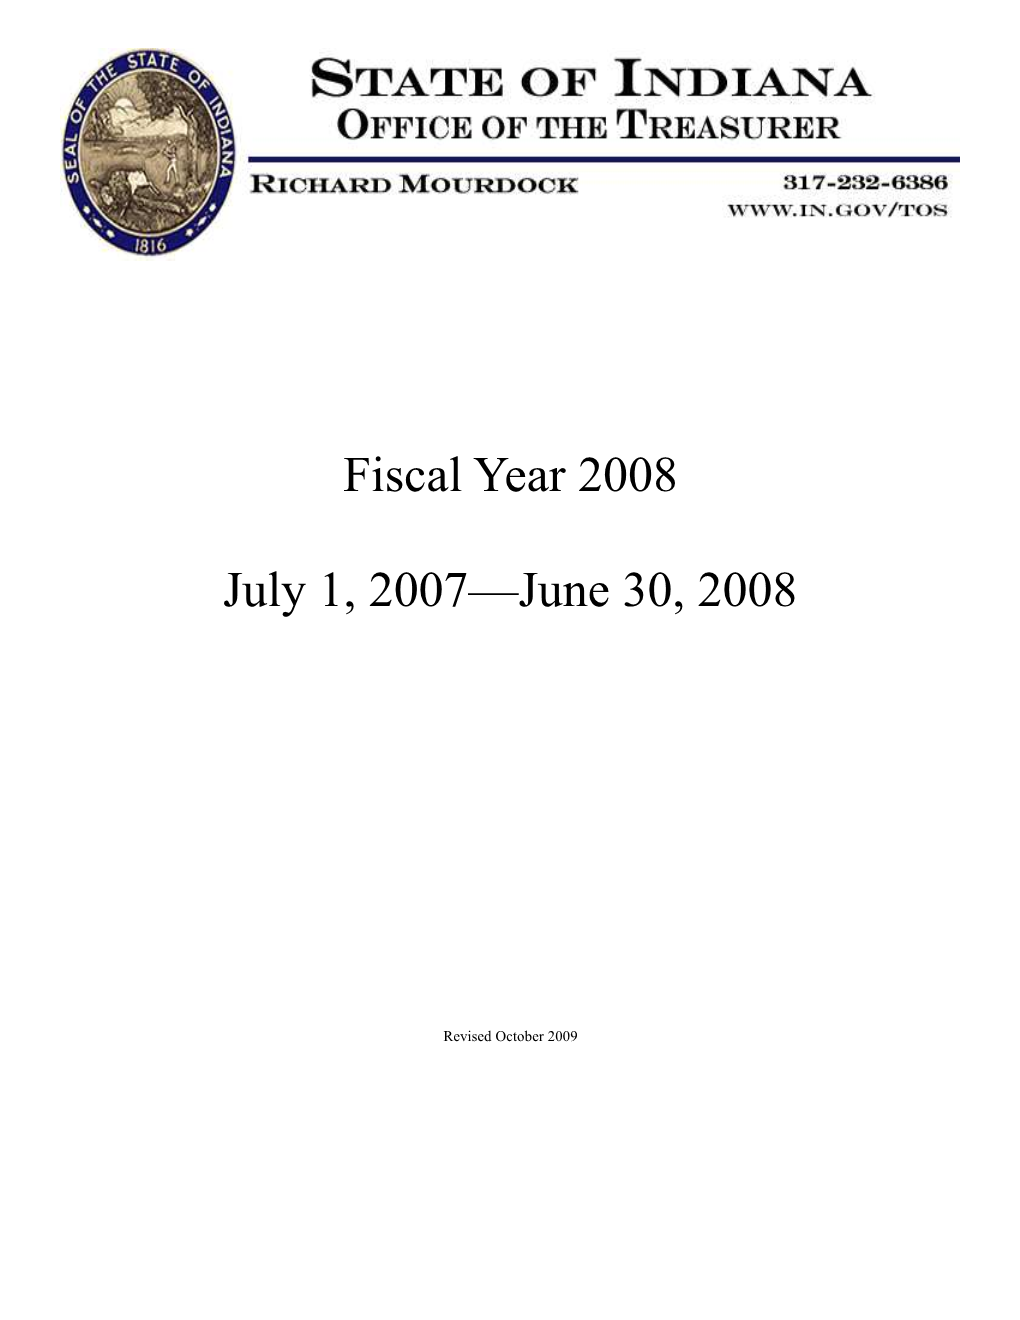 Fiscal Year 2008 July 1, 2007—June 30, 2008